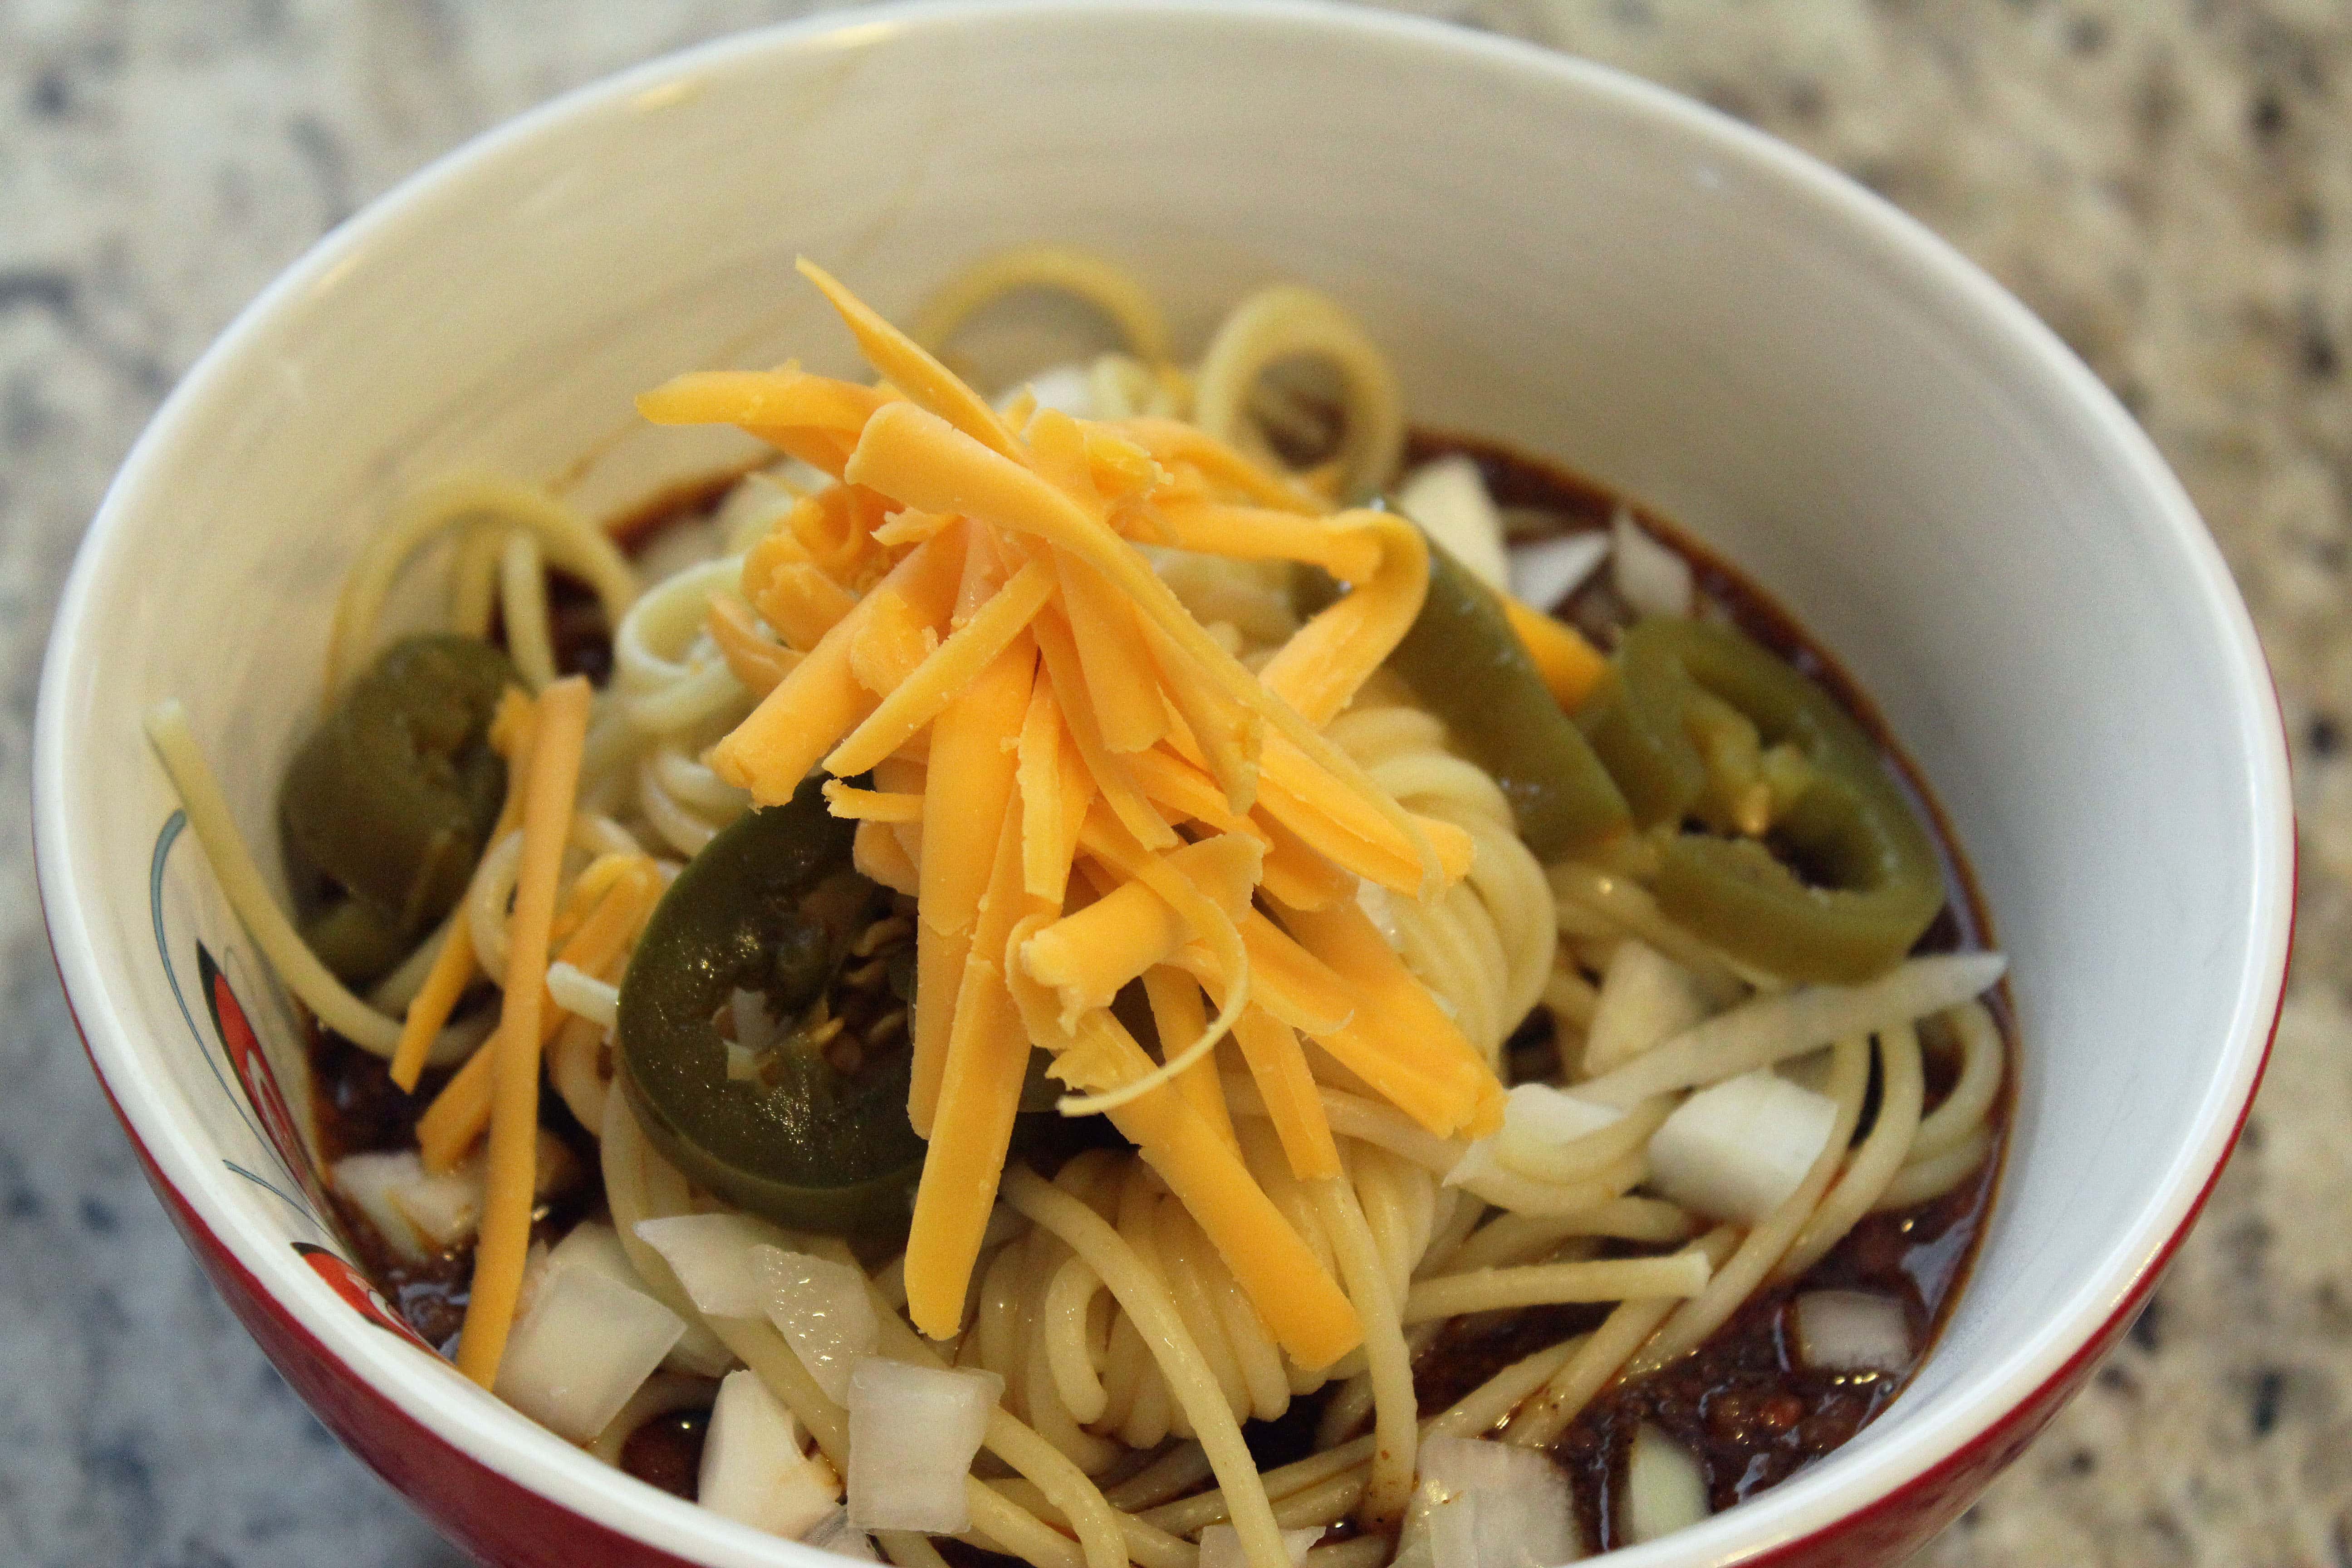 Top chili with pasta and toppings